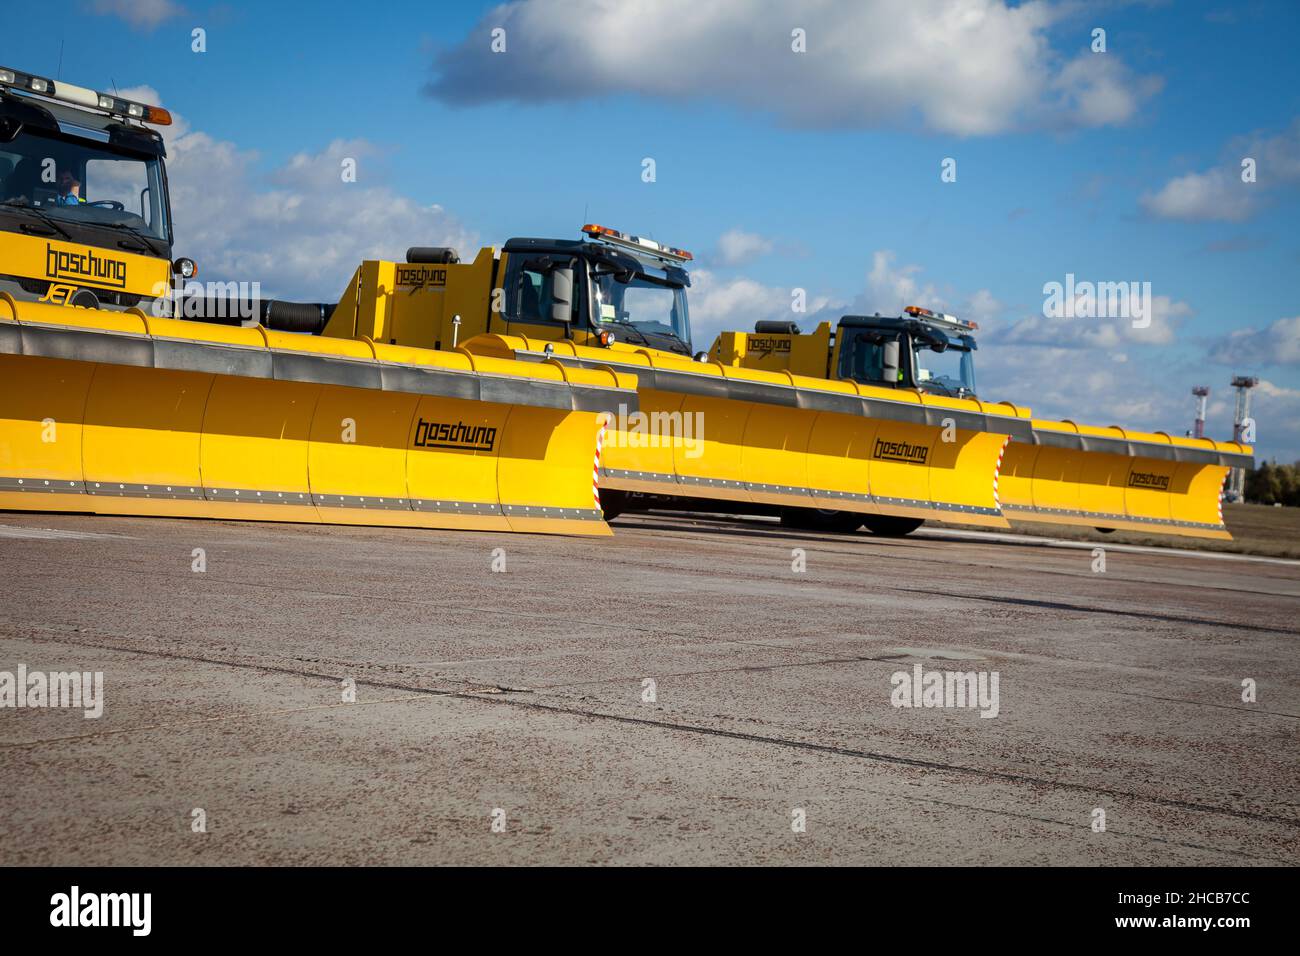 Kyiv, Ukraine - October 29, 2019: BOSCHUNG JETBROOM 9600 snow removal. Multifunctional dump truck cleaning system for airports and highways. Utility machinery -a truck with a large blade and a bucket Stock Photo